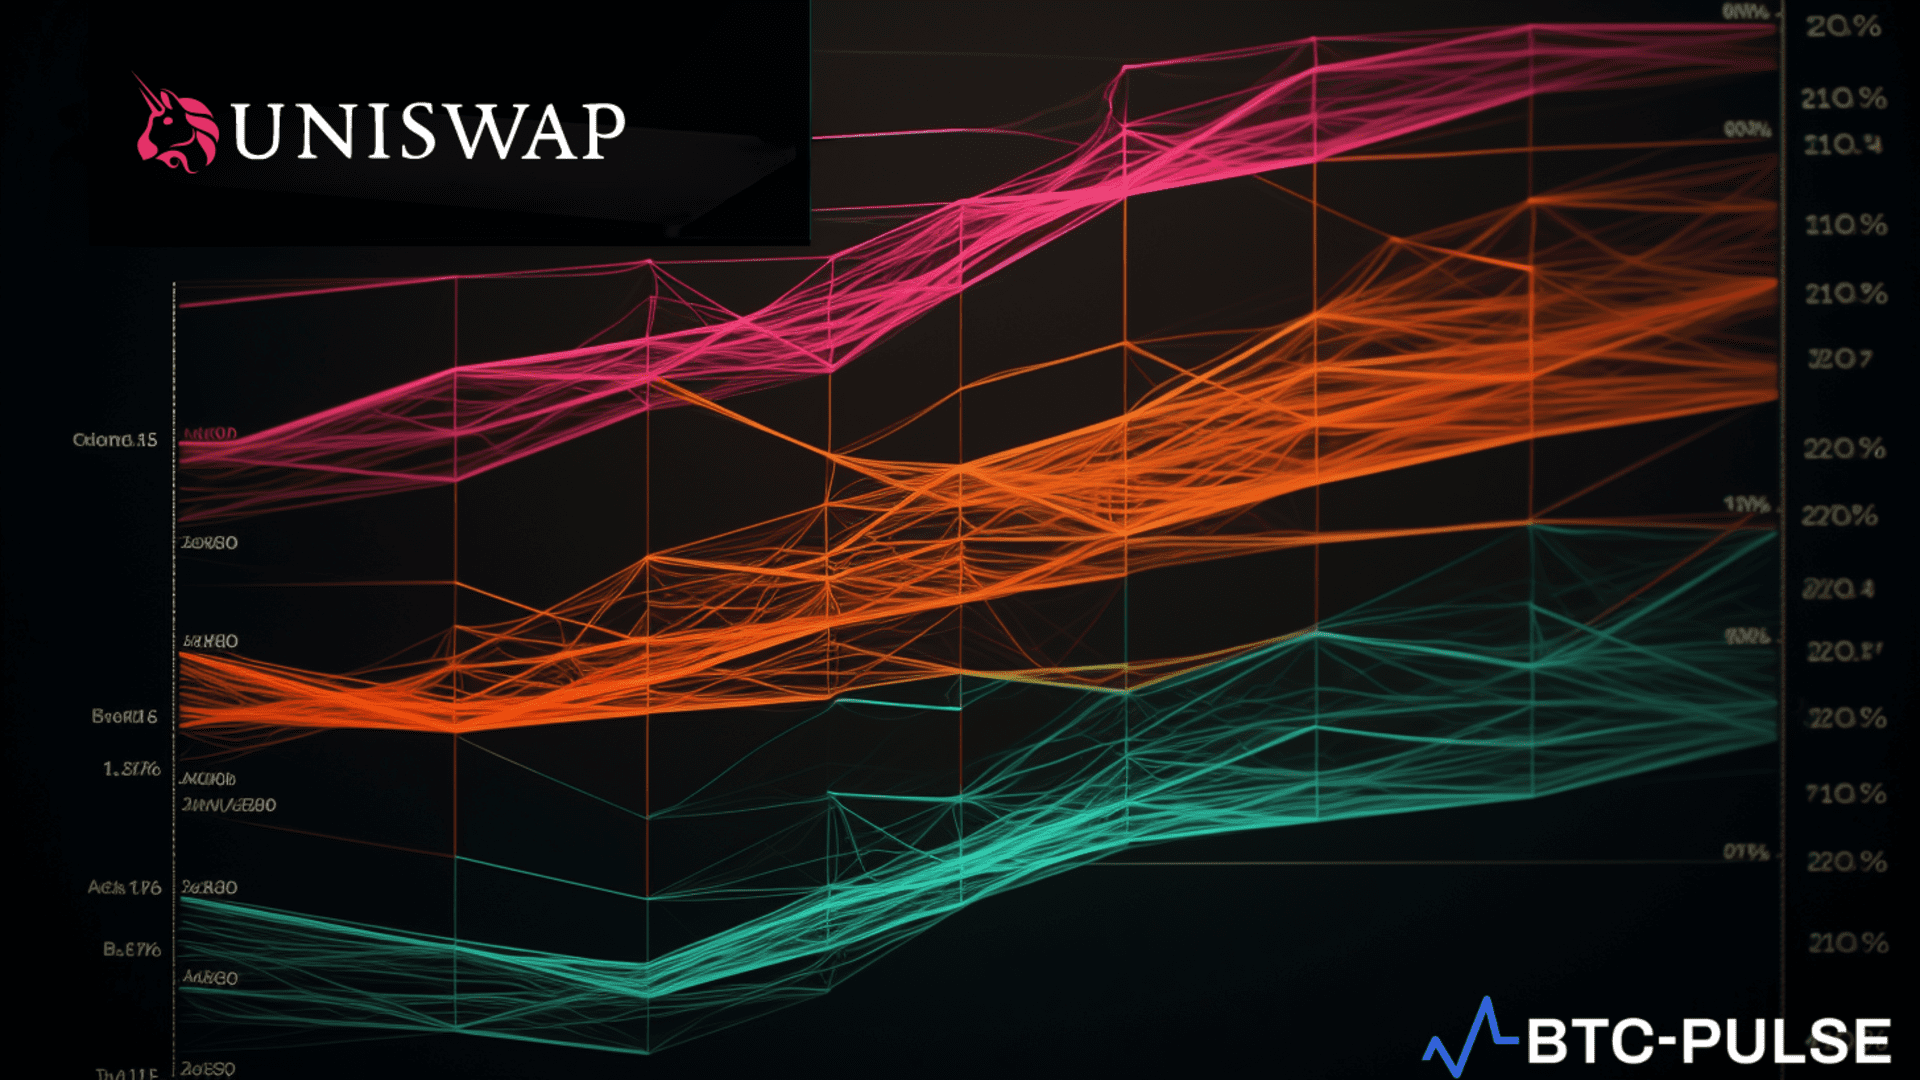 Uniswap Study Shows Layer 2 Networks Offer Cheaper Transactions Than Ethereum